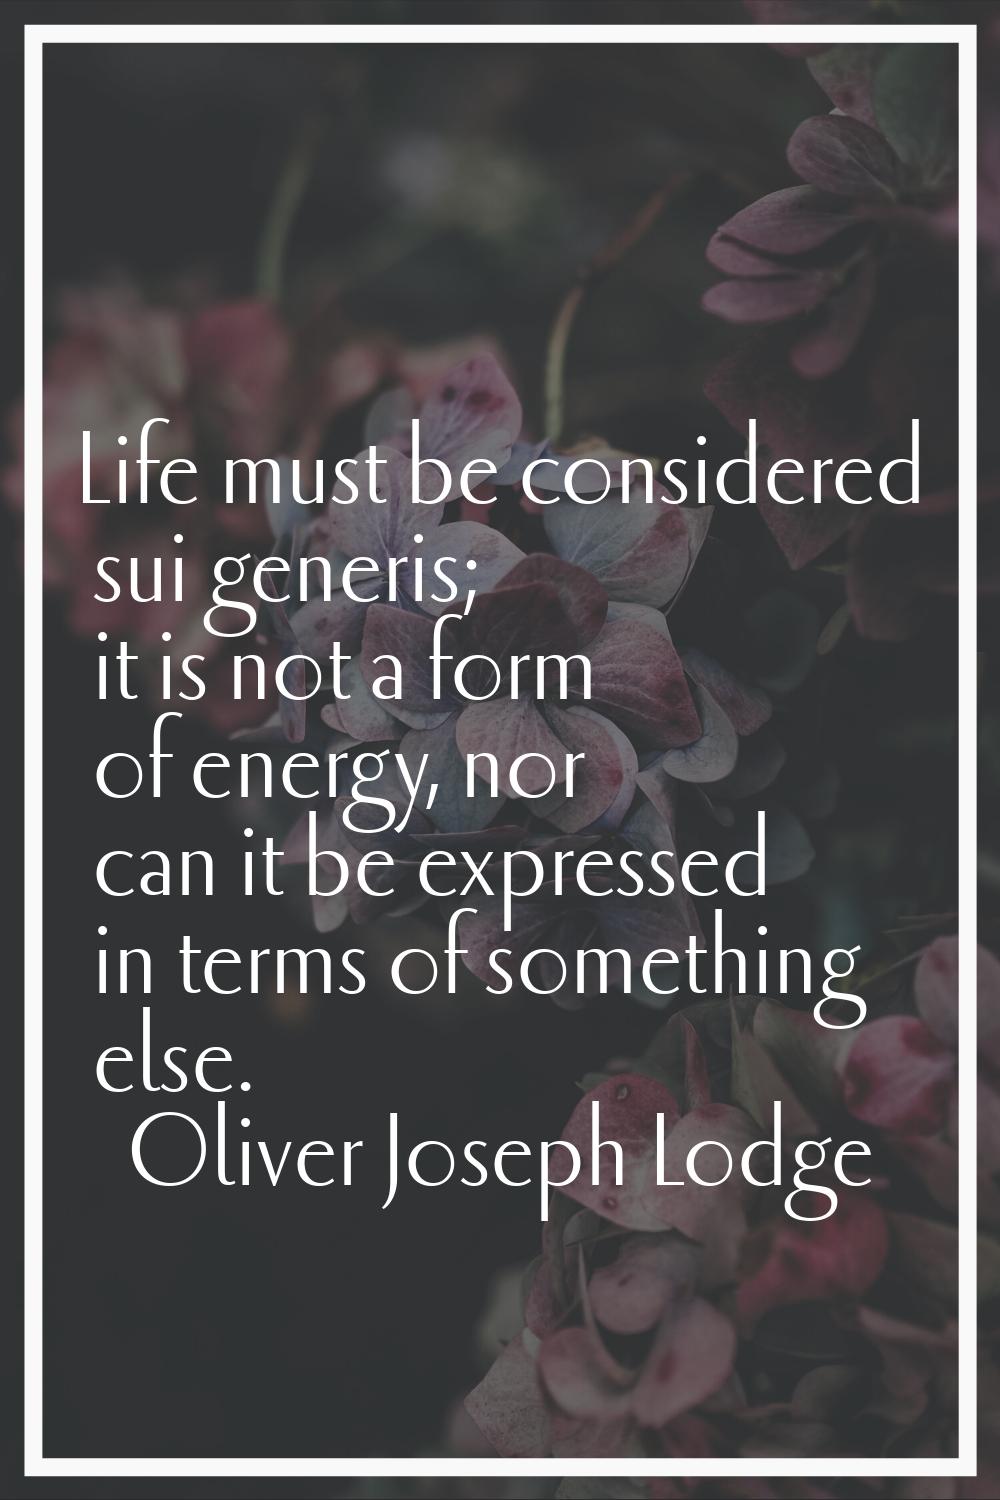 Life must be considered sui generis; it is not a form of energy, nor can it be expressed in terms o